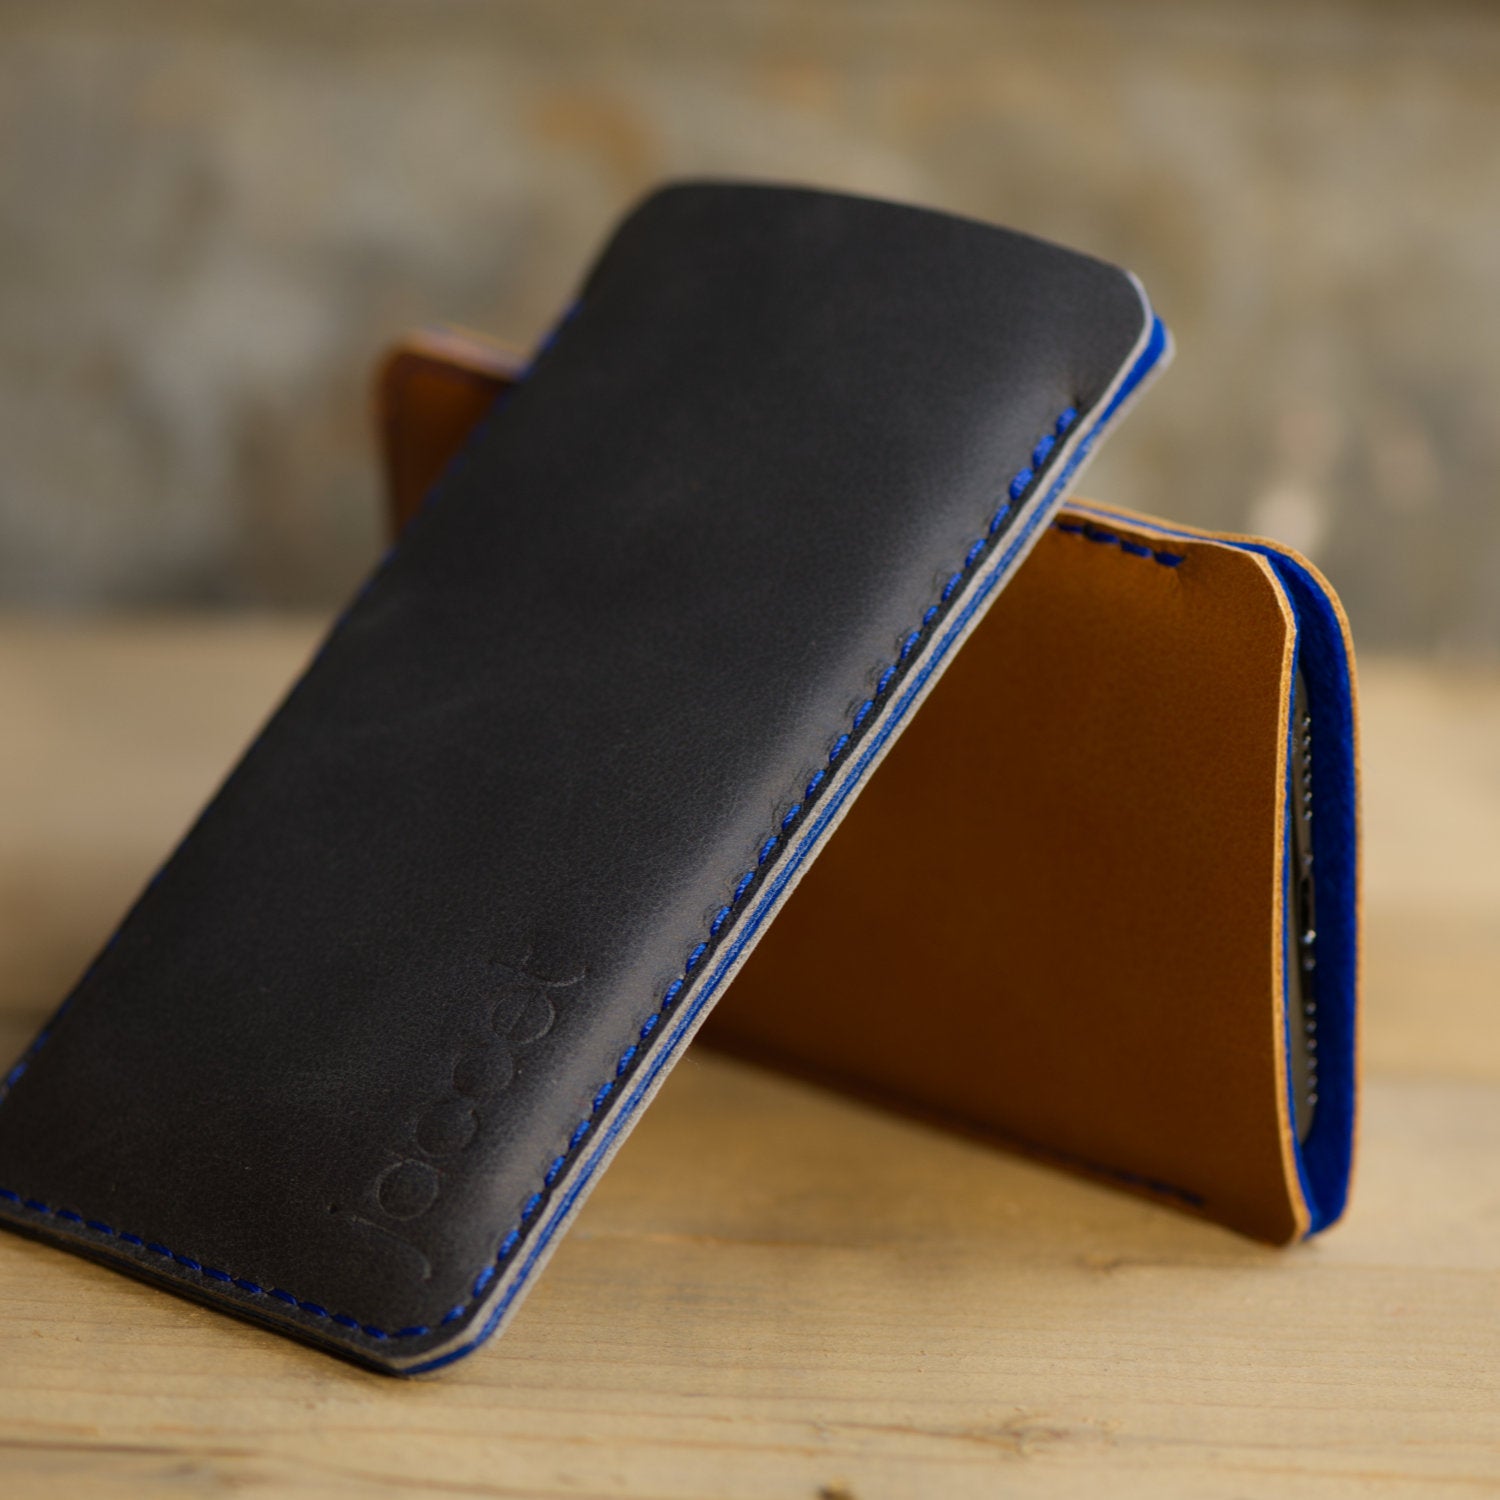 JACCET leather Xiaomi sleeve - anthracite/black leather with blue wool felt. 100% Handmade